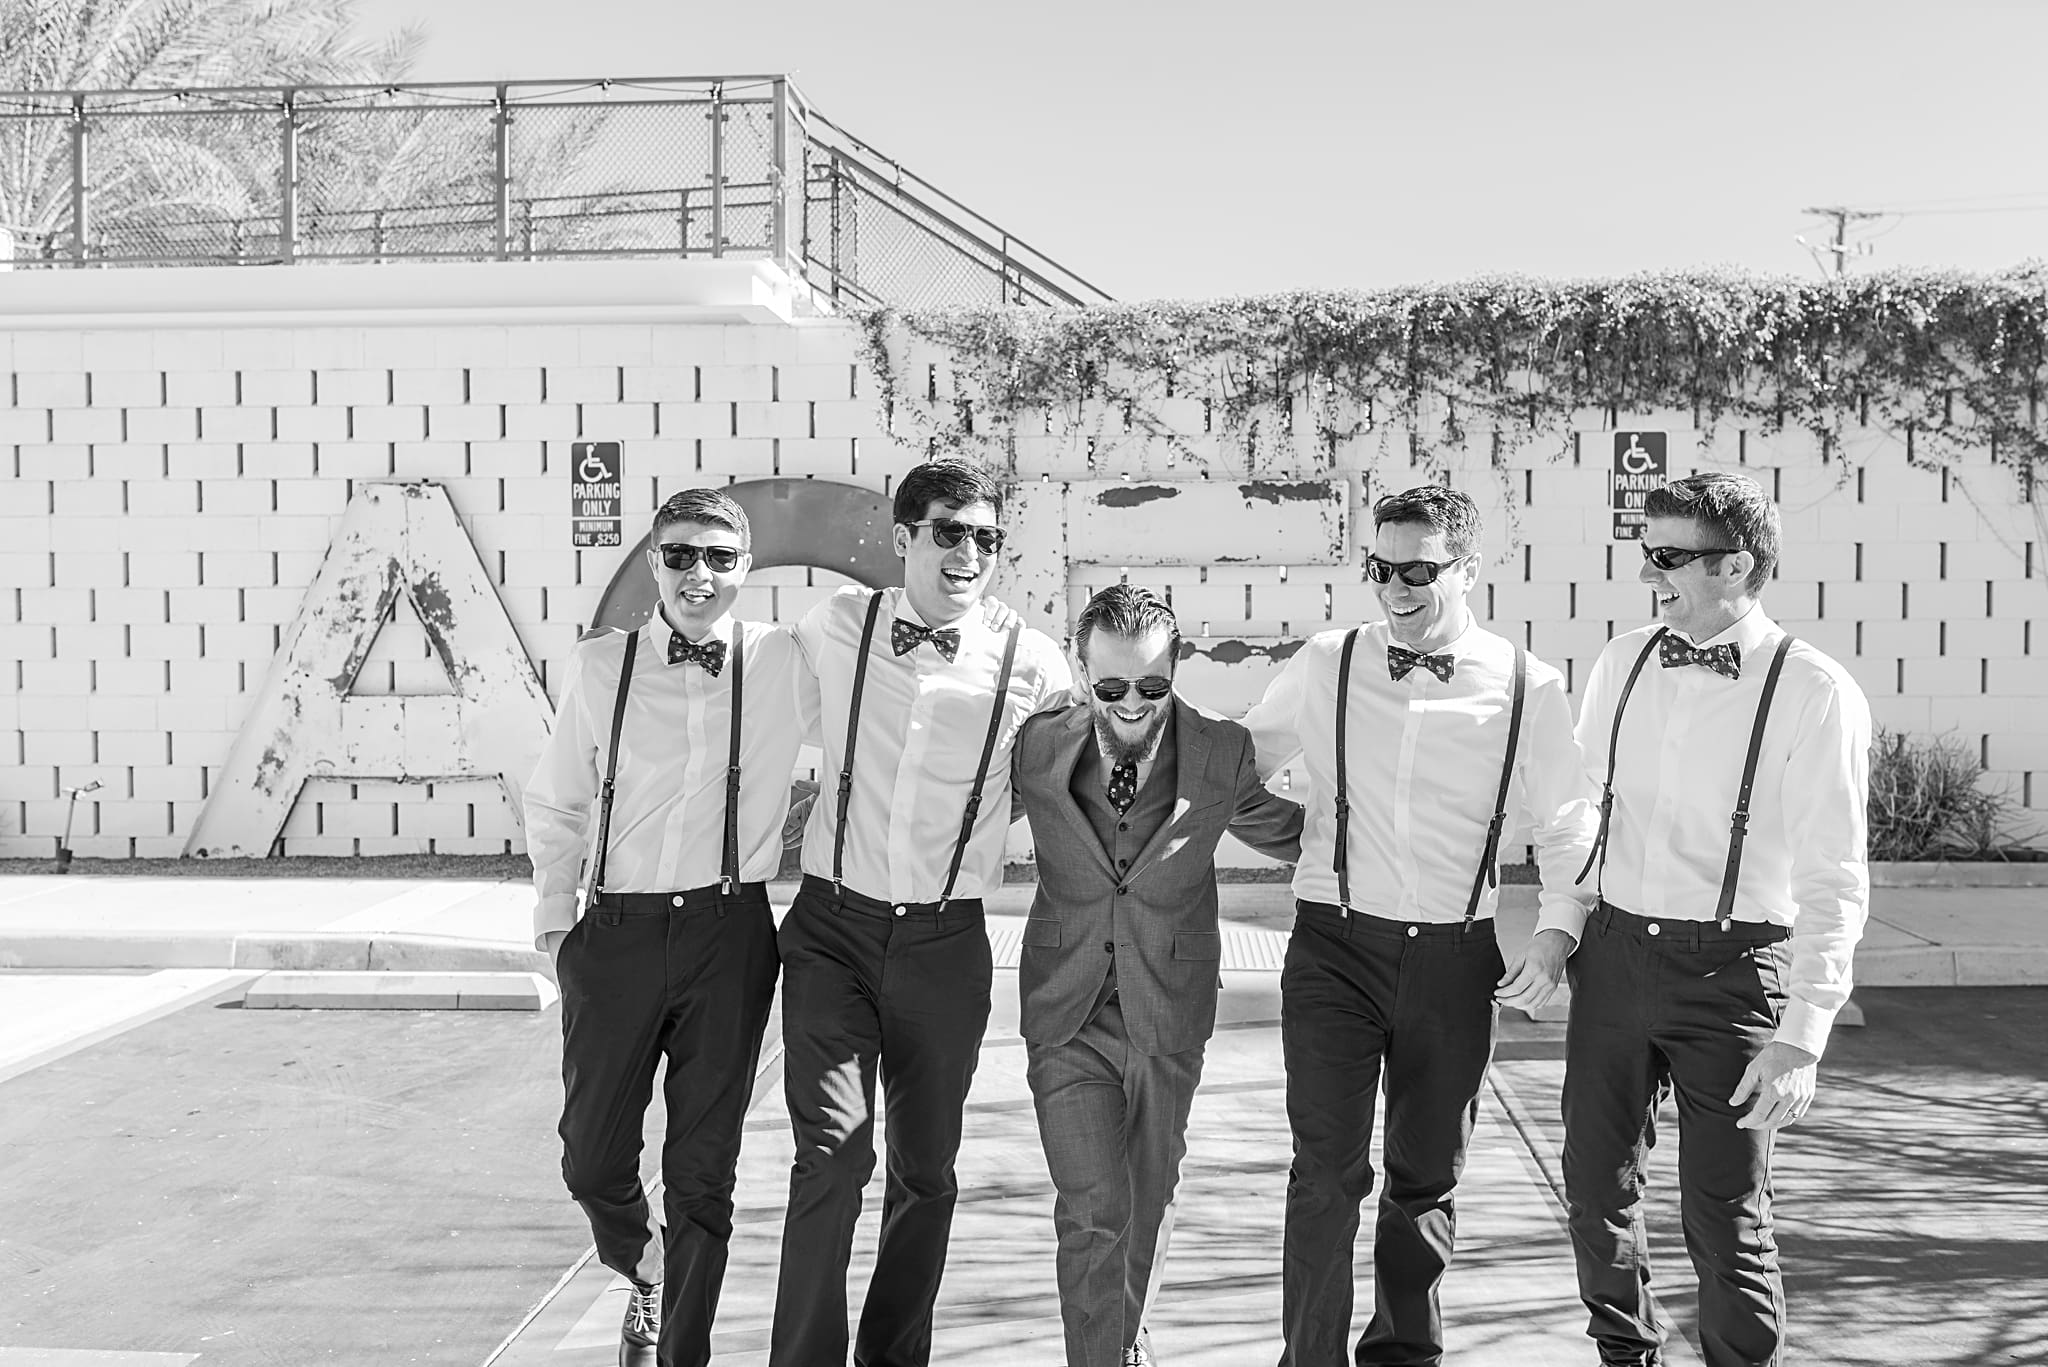 grooms party in sunglasses